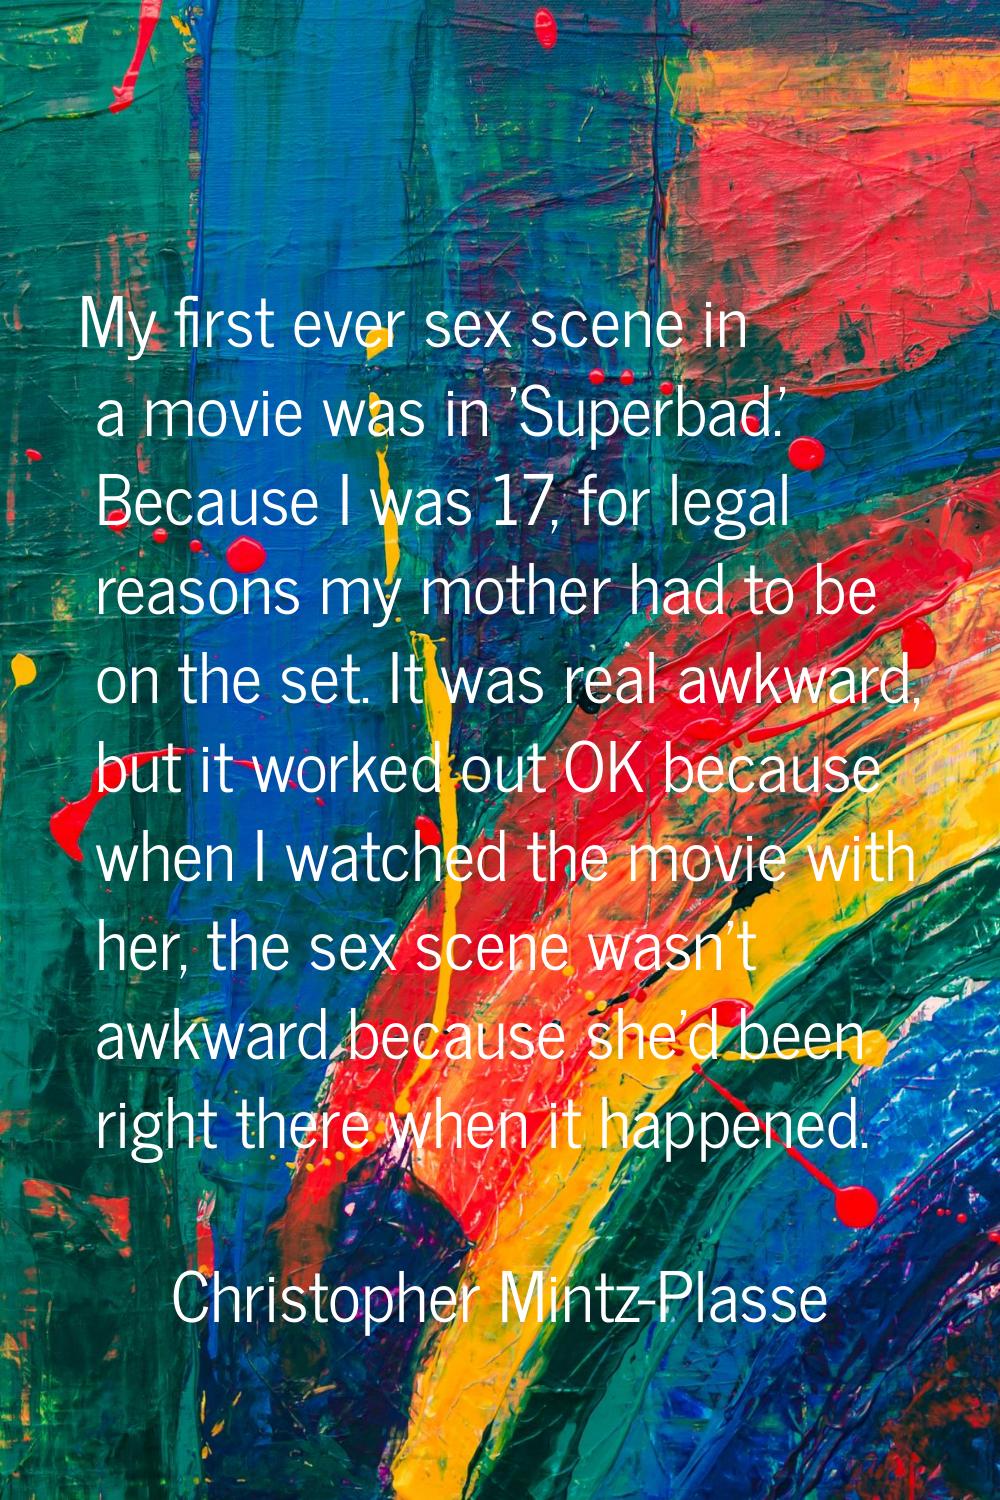 My first ever sex scene in a movie was in 'Superbad.' Because I was 17, for legal reasons my mother